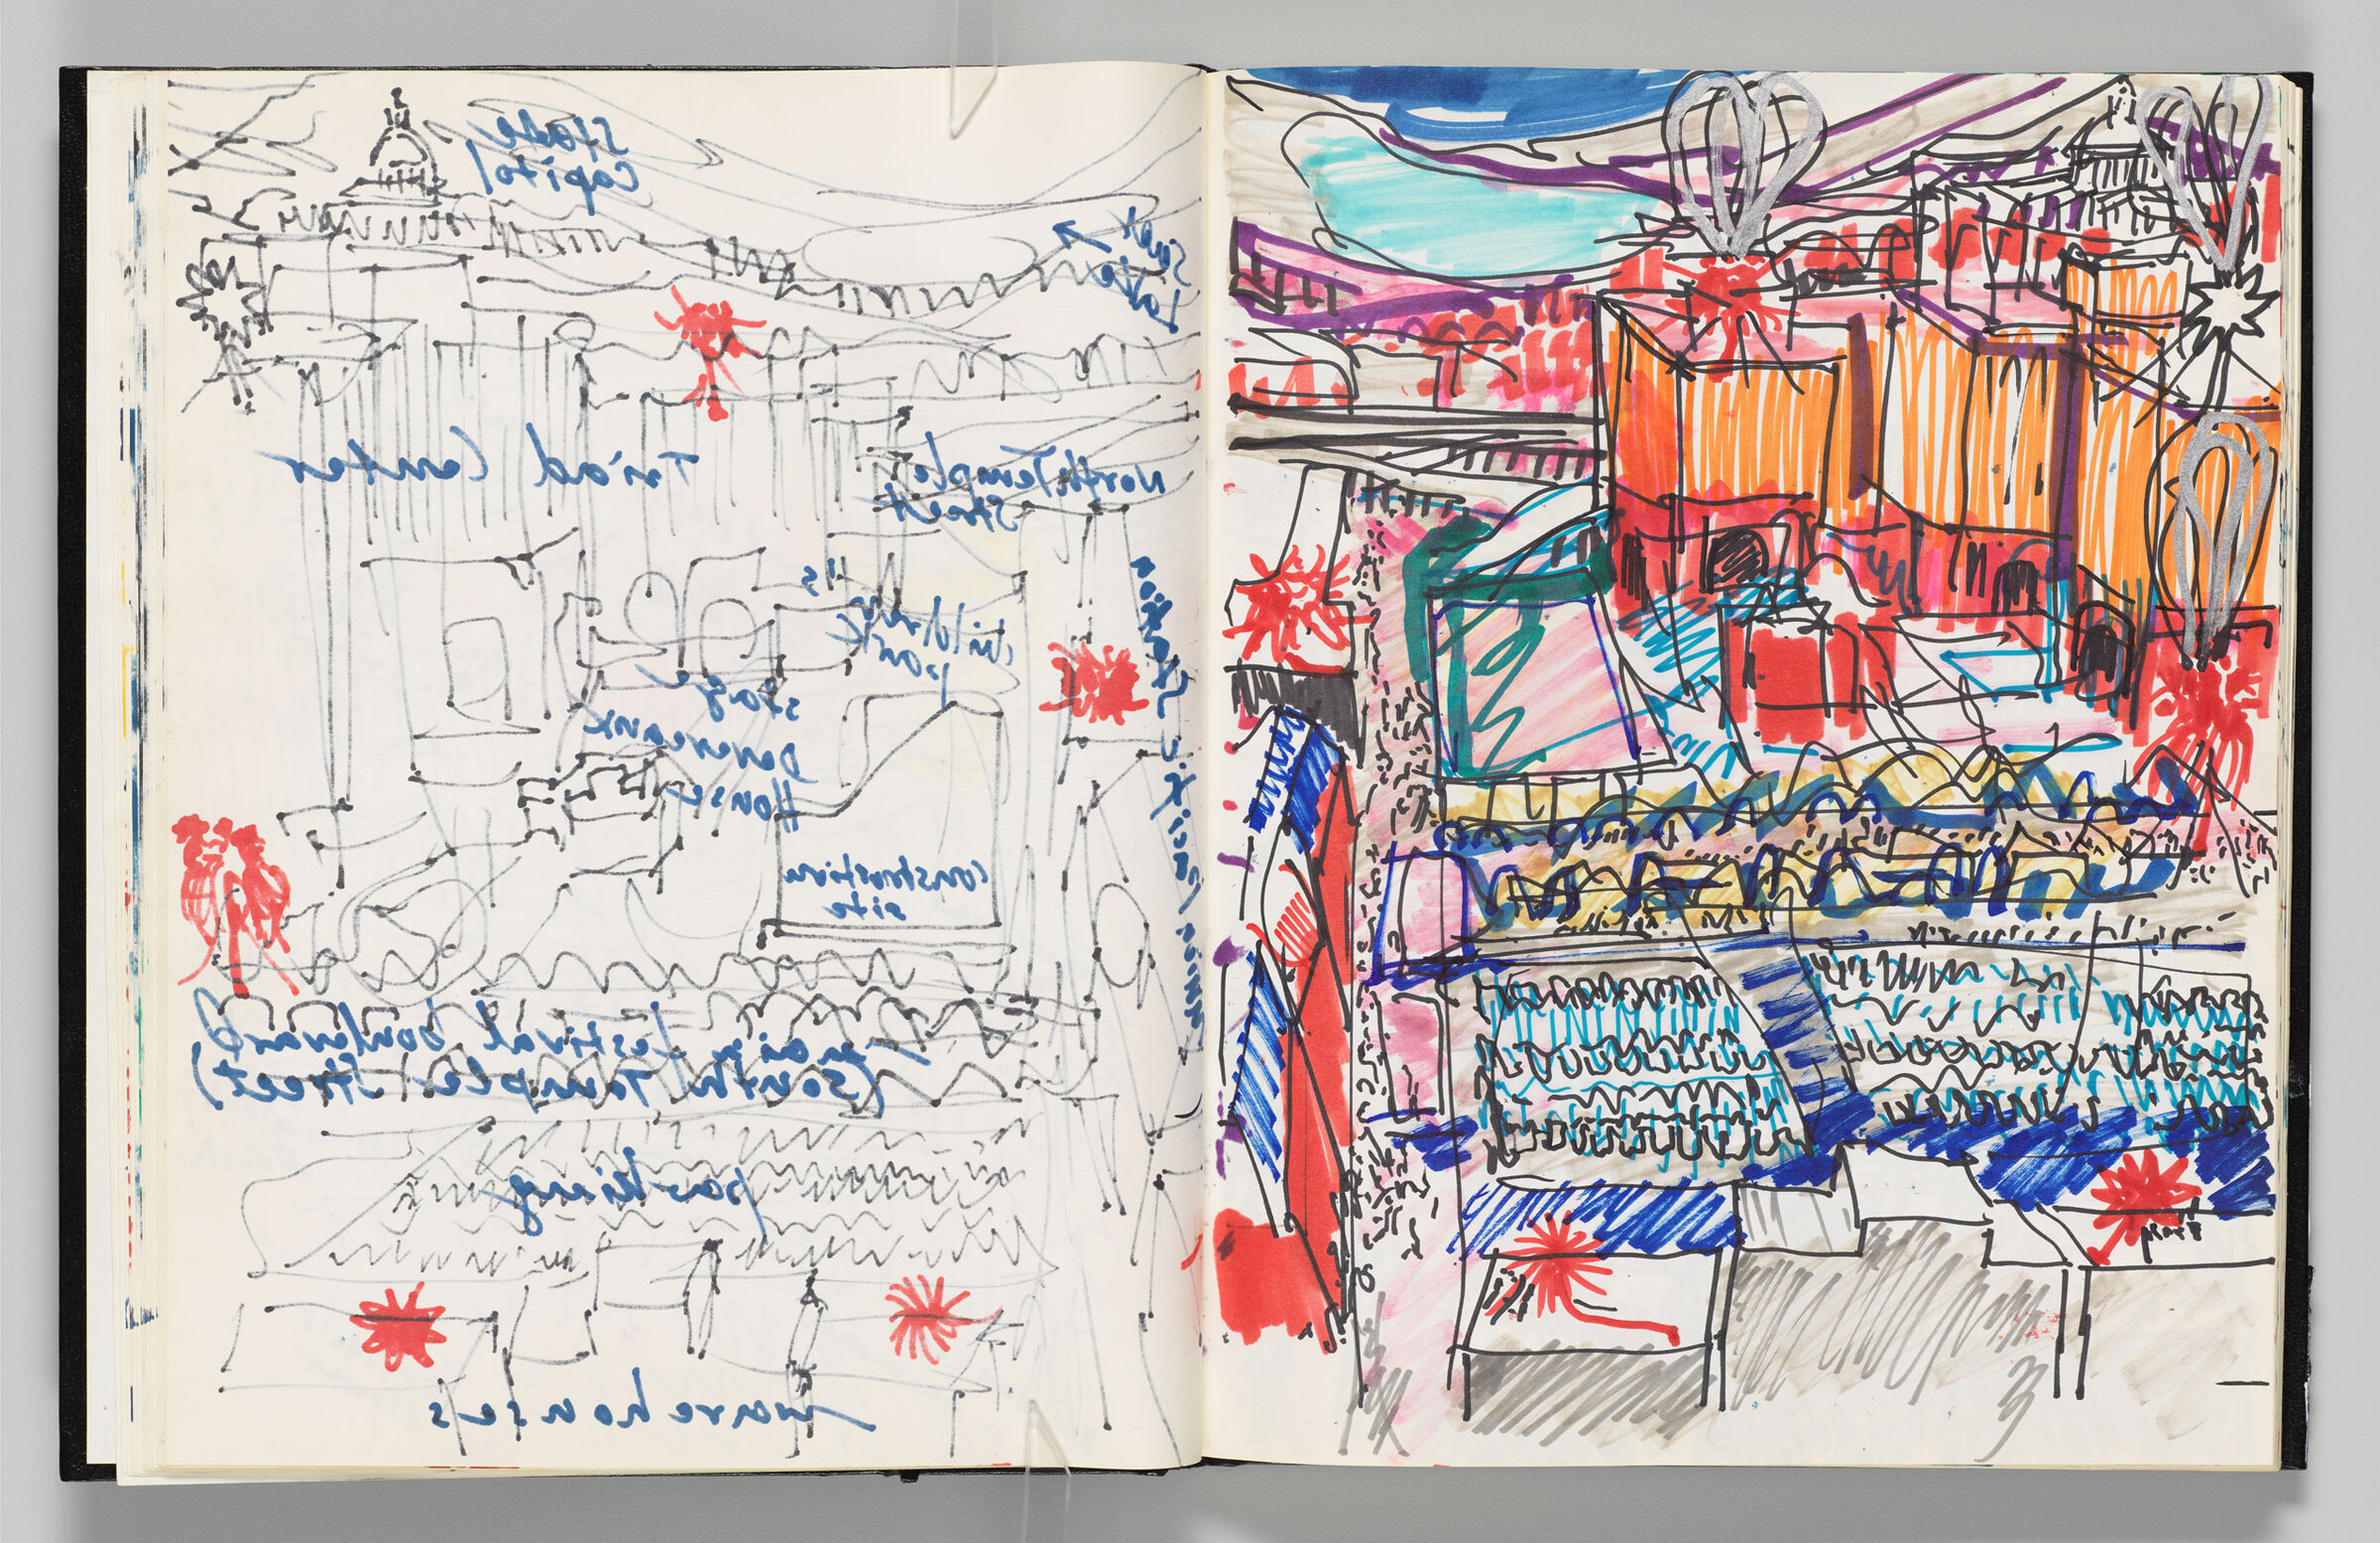 Untitled (Bleed-Through Of Previous Page, Left Page); Untitled (Salt Lake City Exhibition Overview, Right Page)